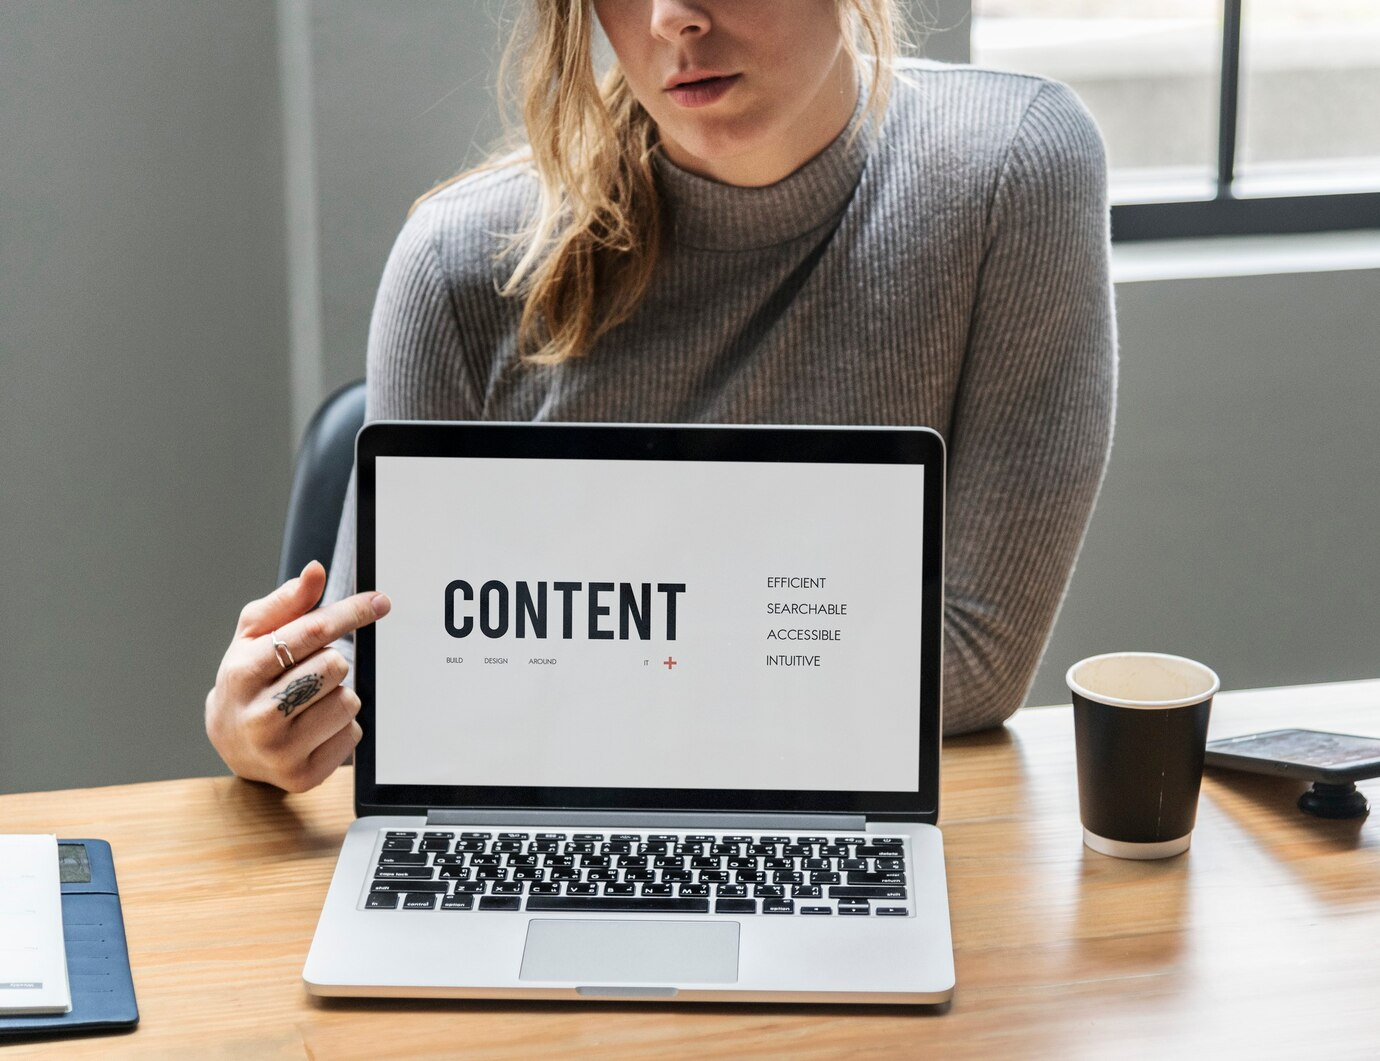 A girl pointing towards the word "content" on a laptop screen.